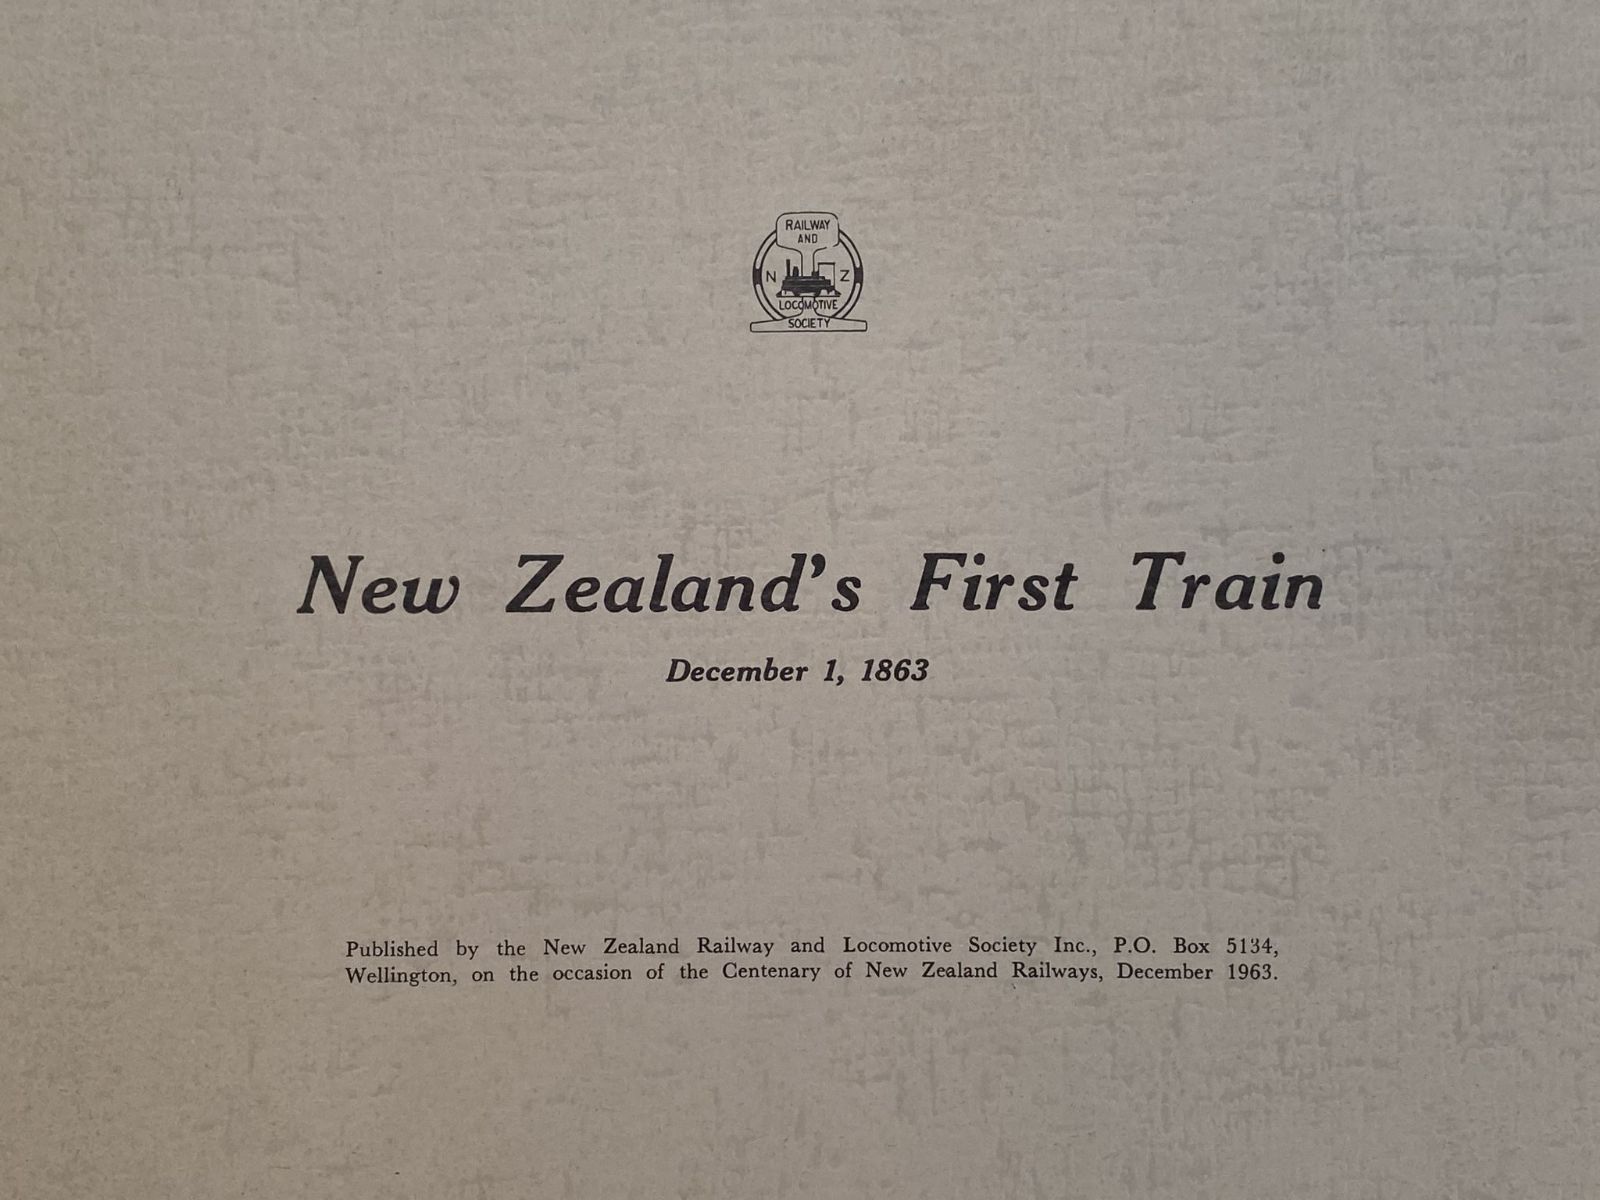 OLD PHOTO: New Zealand's First Train - December 1, 1863